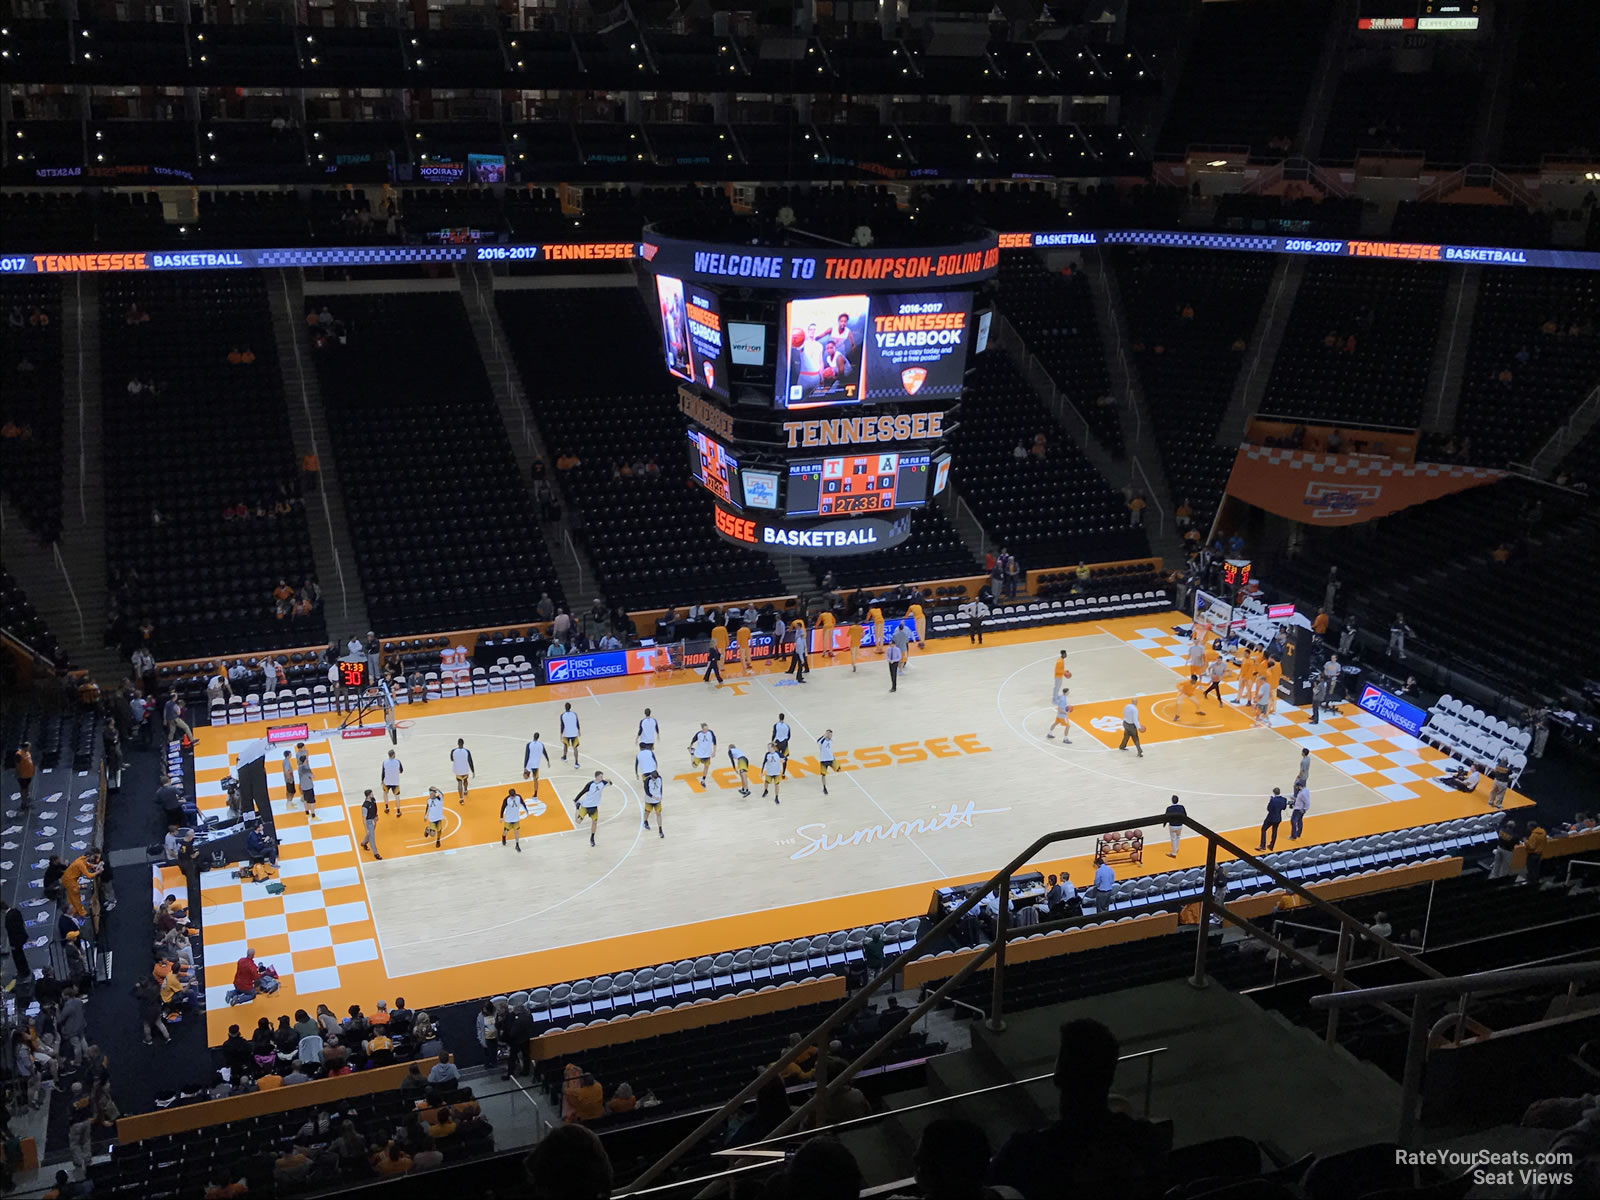 Thompson-Boling Arena Section 323 - RateYourSeats.com